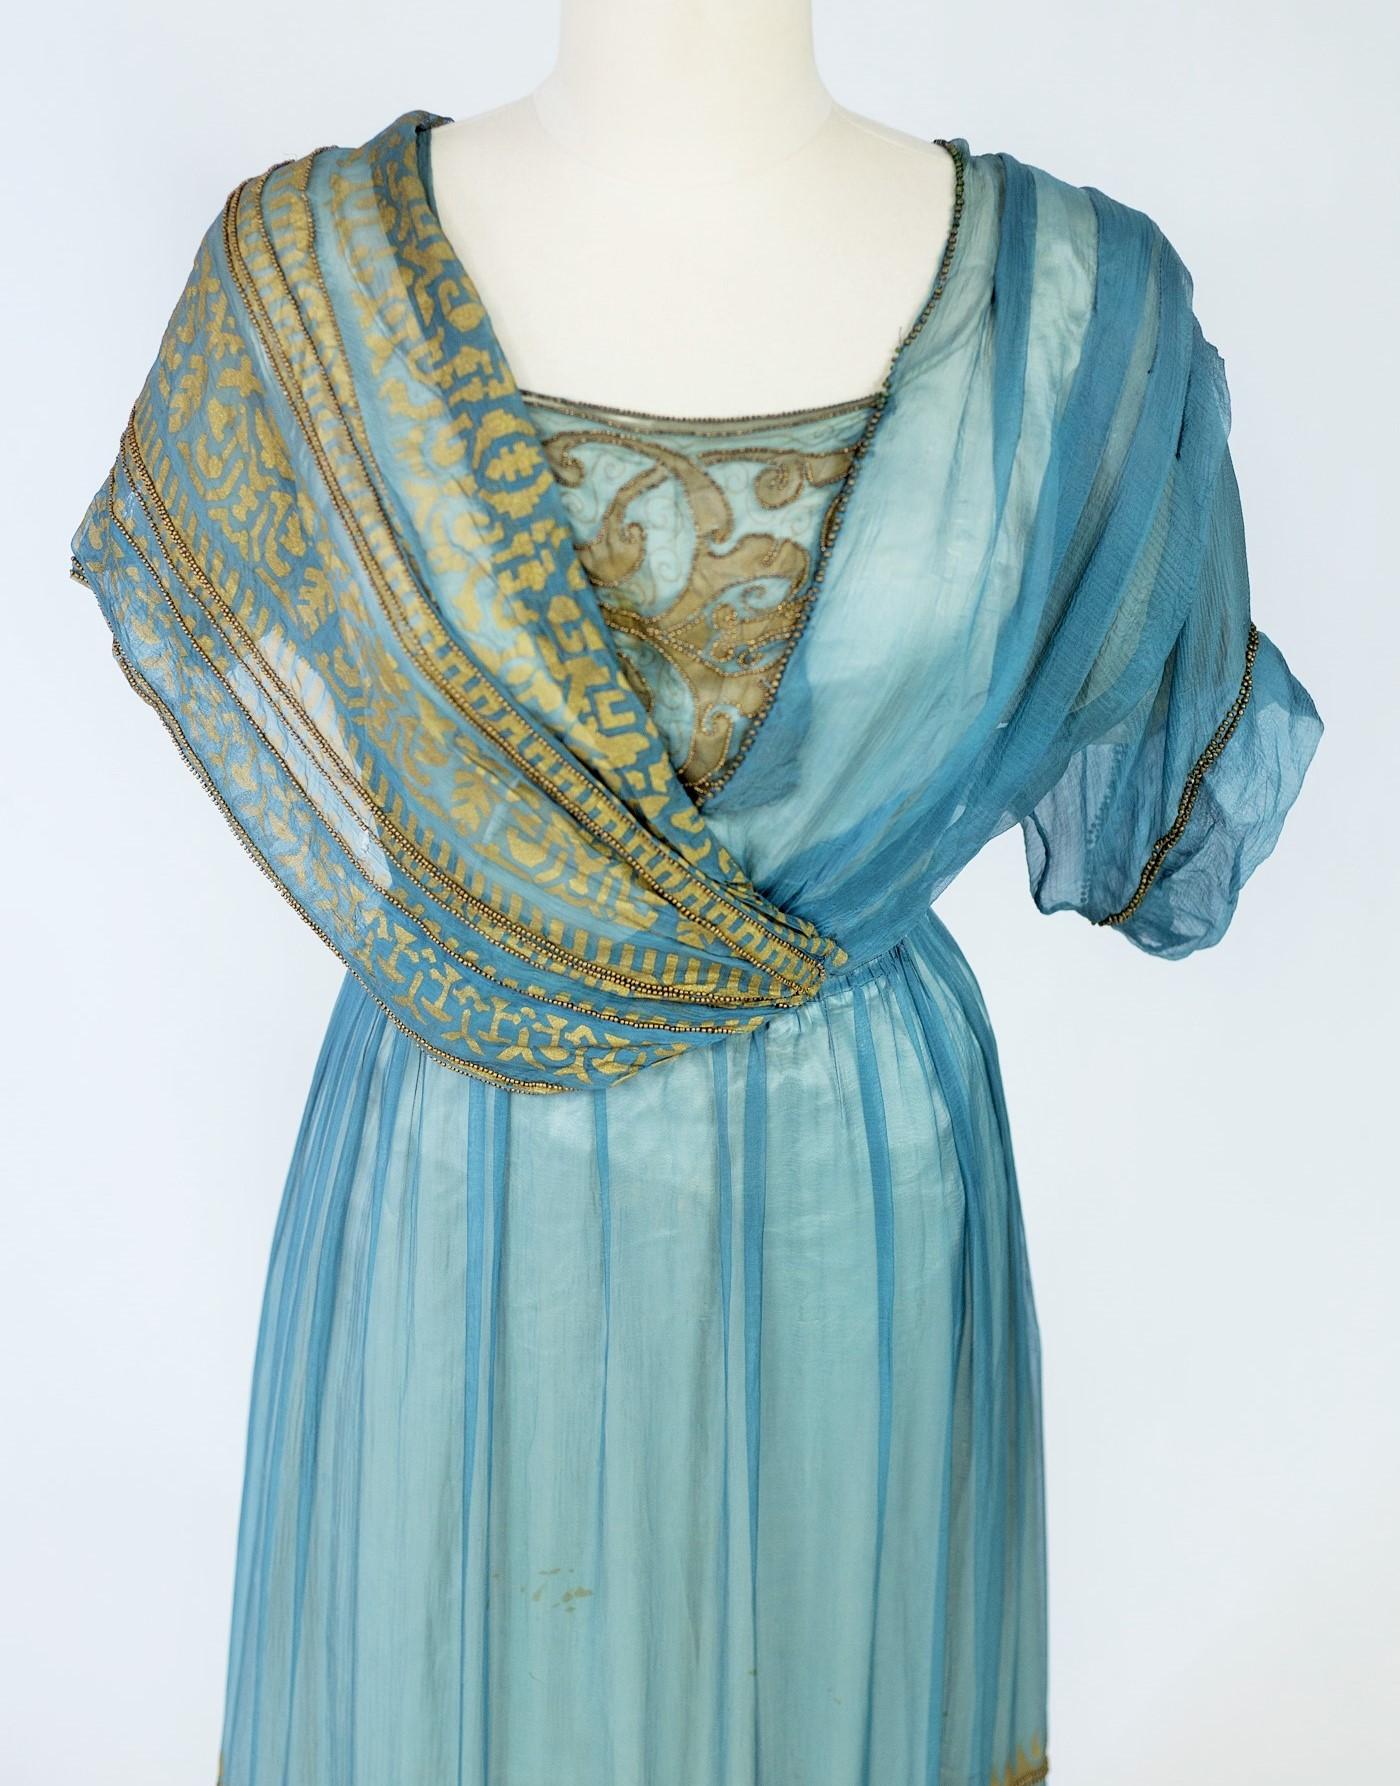 Circa 1910-1915
France
Evening dress in blue silk chiffon printed with geometric friezes with embroidery of golden rectilinear beads from a fashion house in Lyon. High-waisted cut with asymmetrical bustier by a draped shawl effect crossed on the